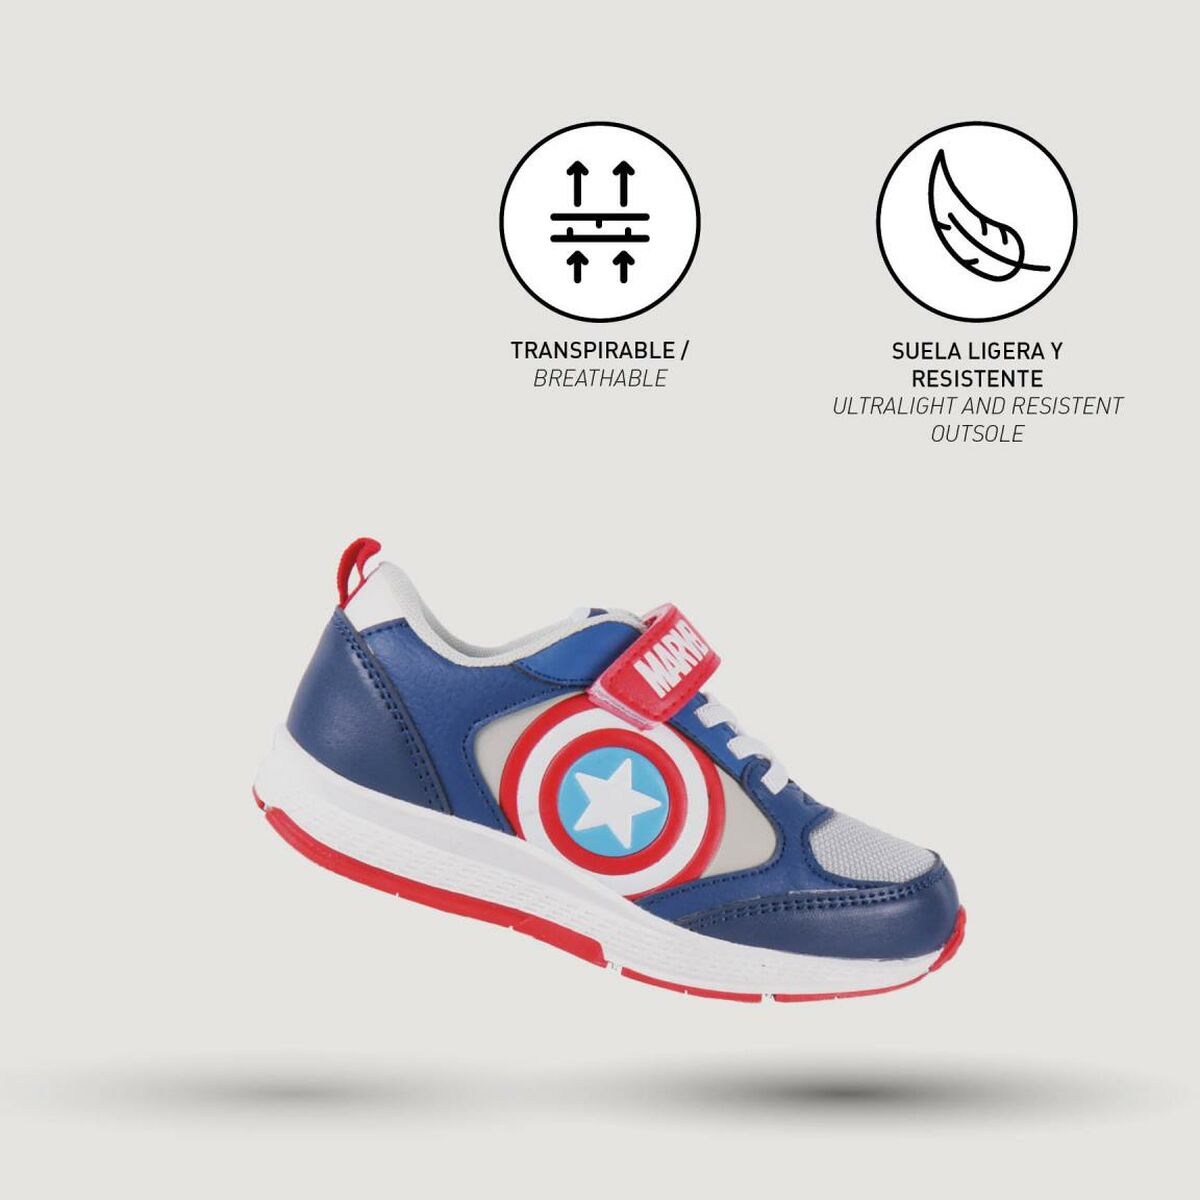 Sports Shoes for Kids The Avengers Blue Red Grey